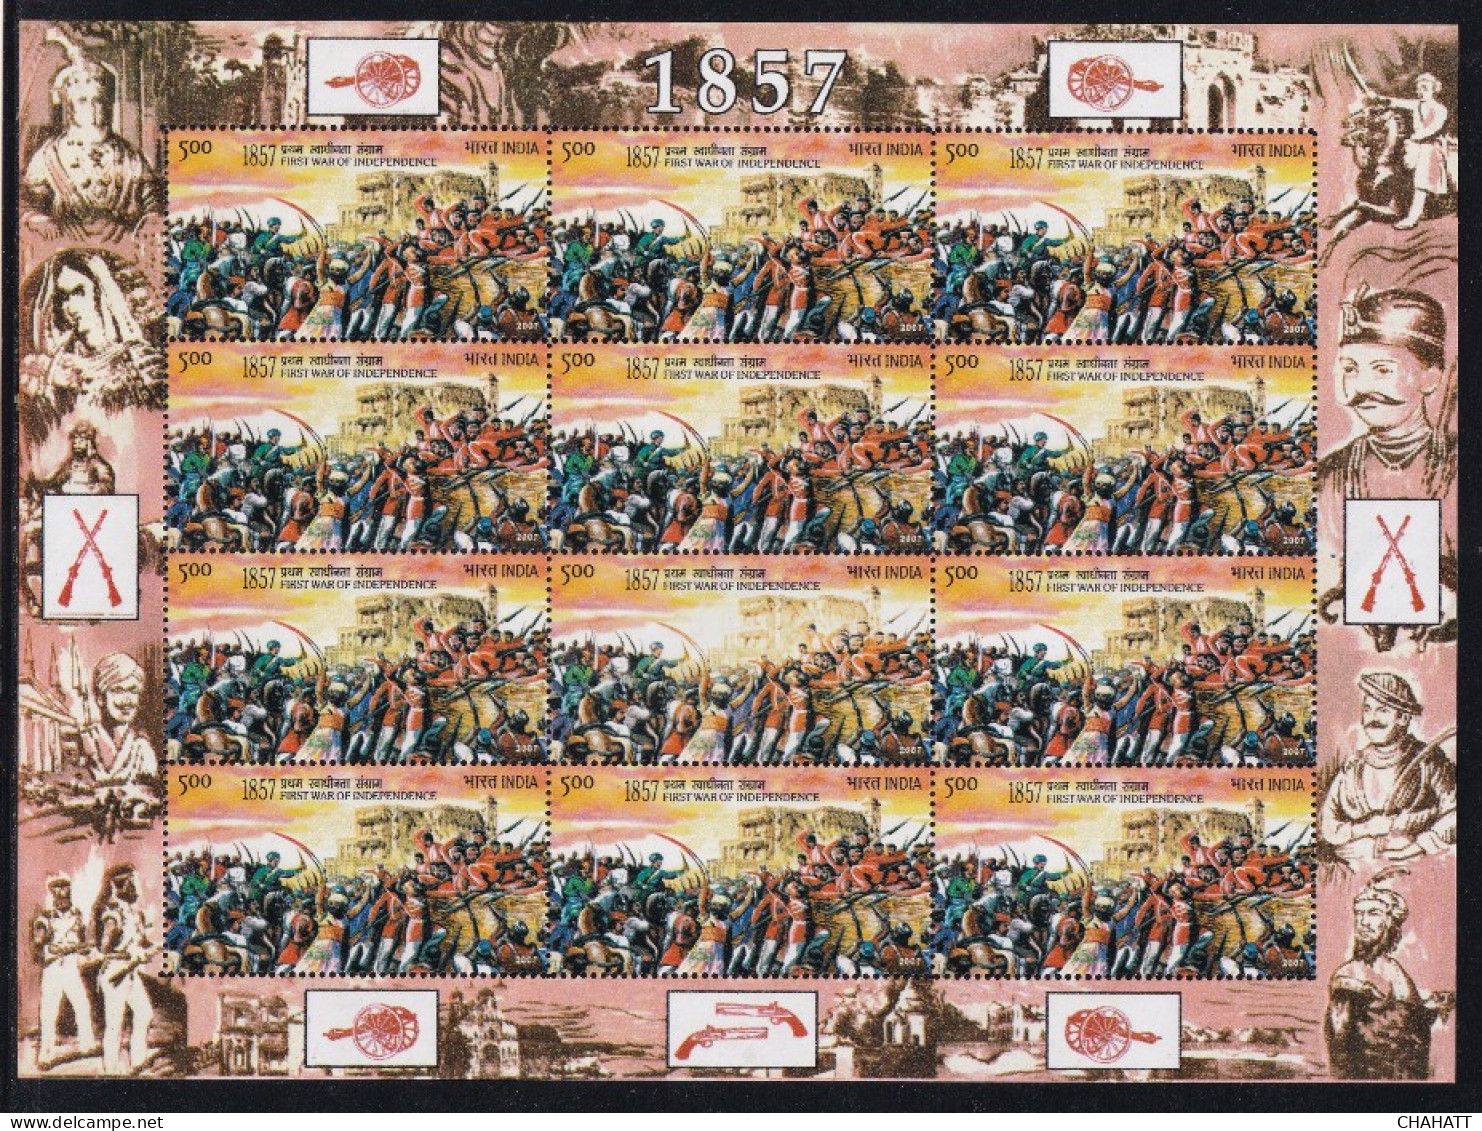 INDIA-2007- 1857- FIRST WAR OF INDEPENDENCE- DRY PRINT- MNH- SCARCE- IE-52 - Errors, Freaks & Oddities (EFO)